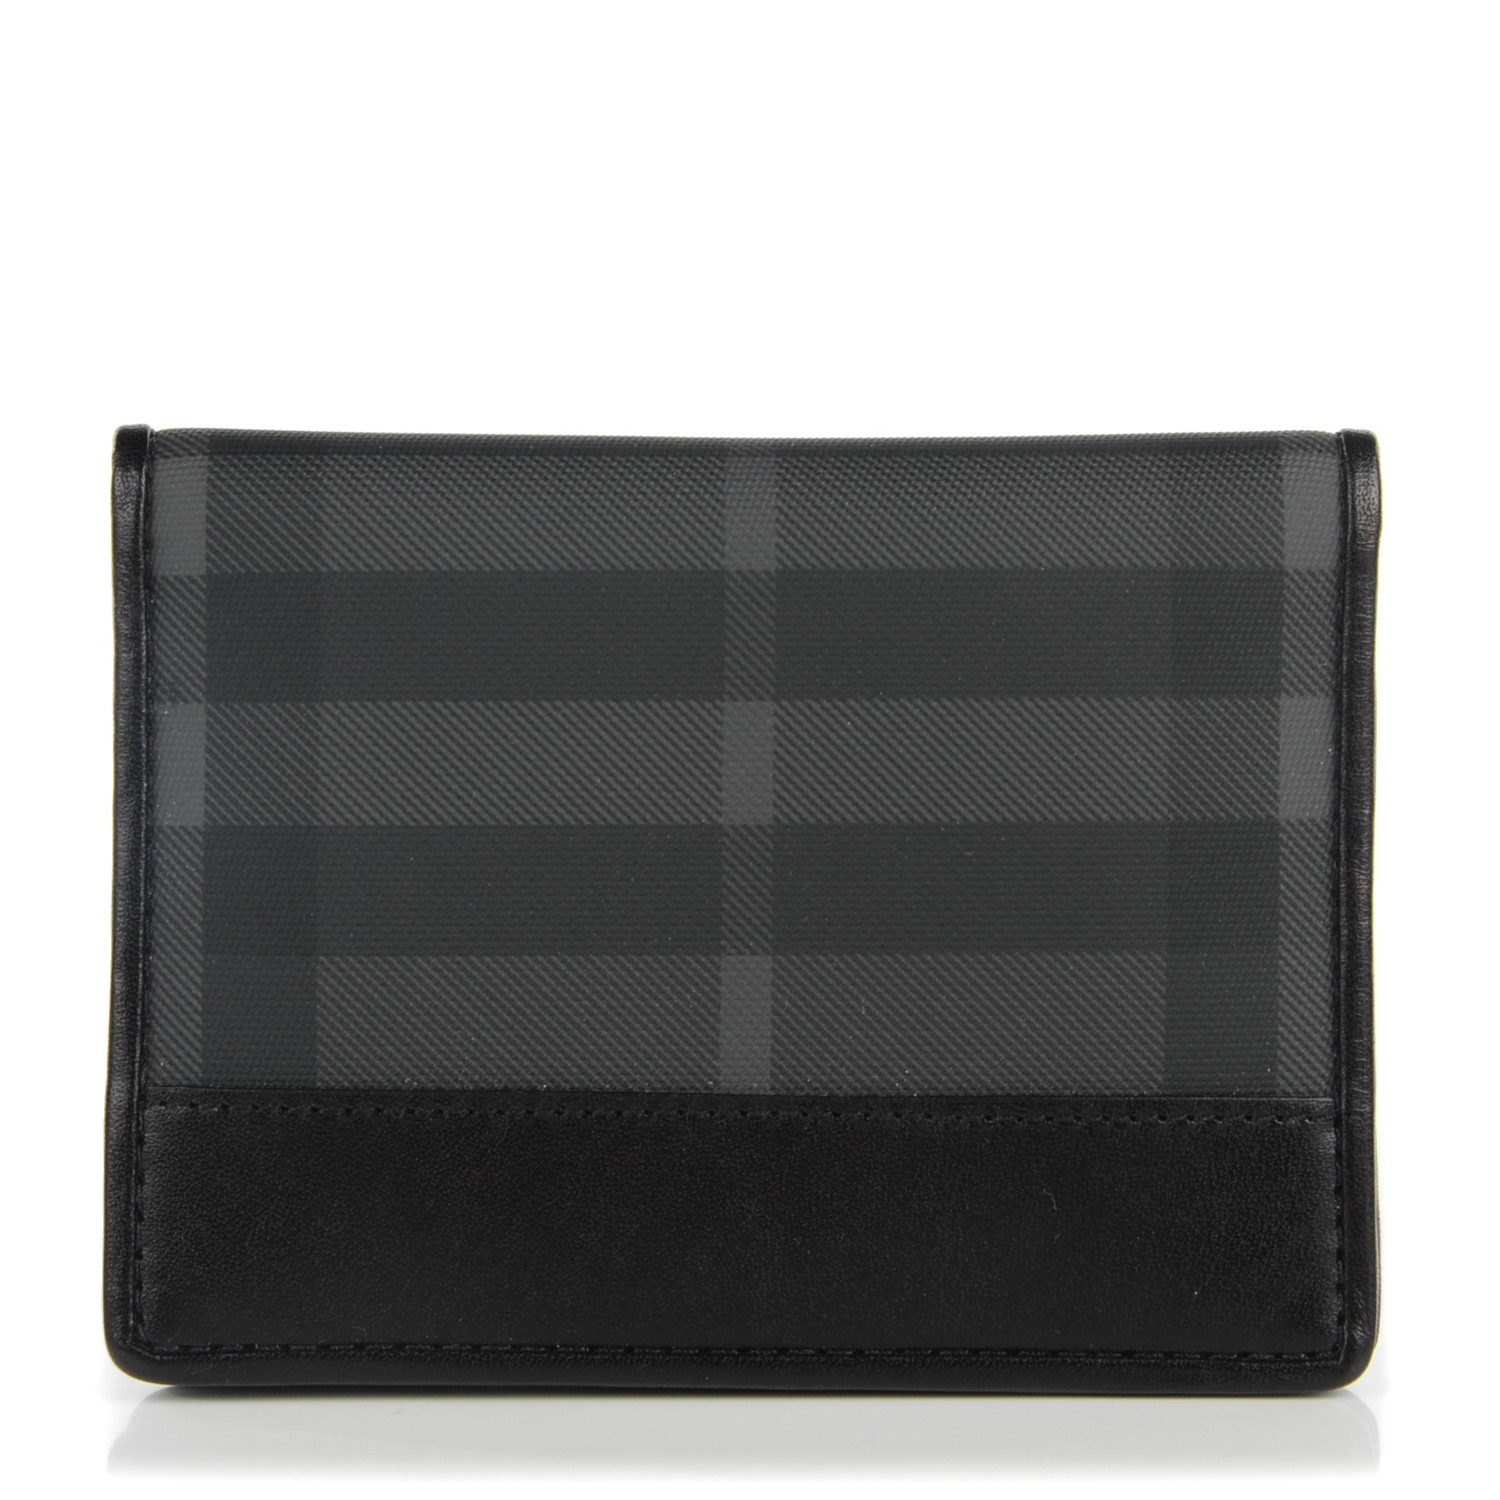 burberry mens wallets on sale